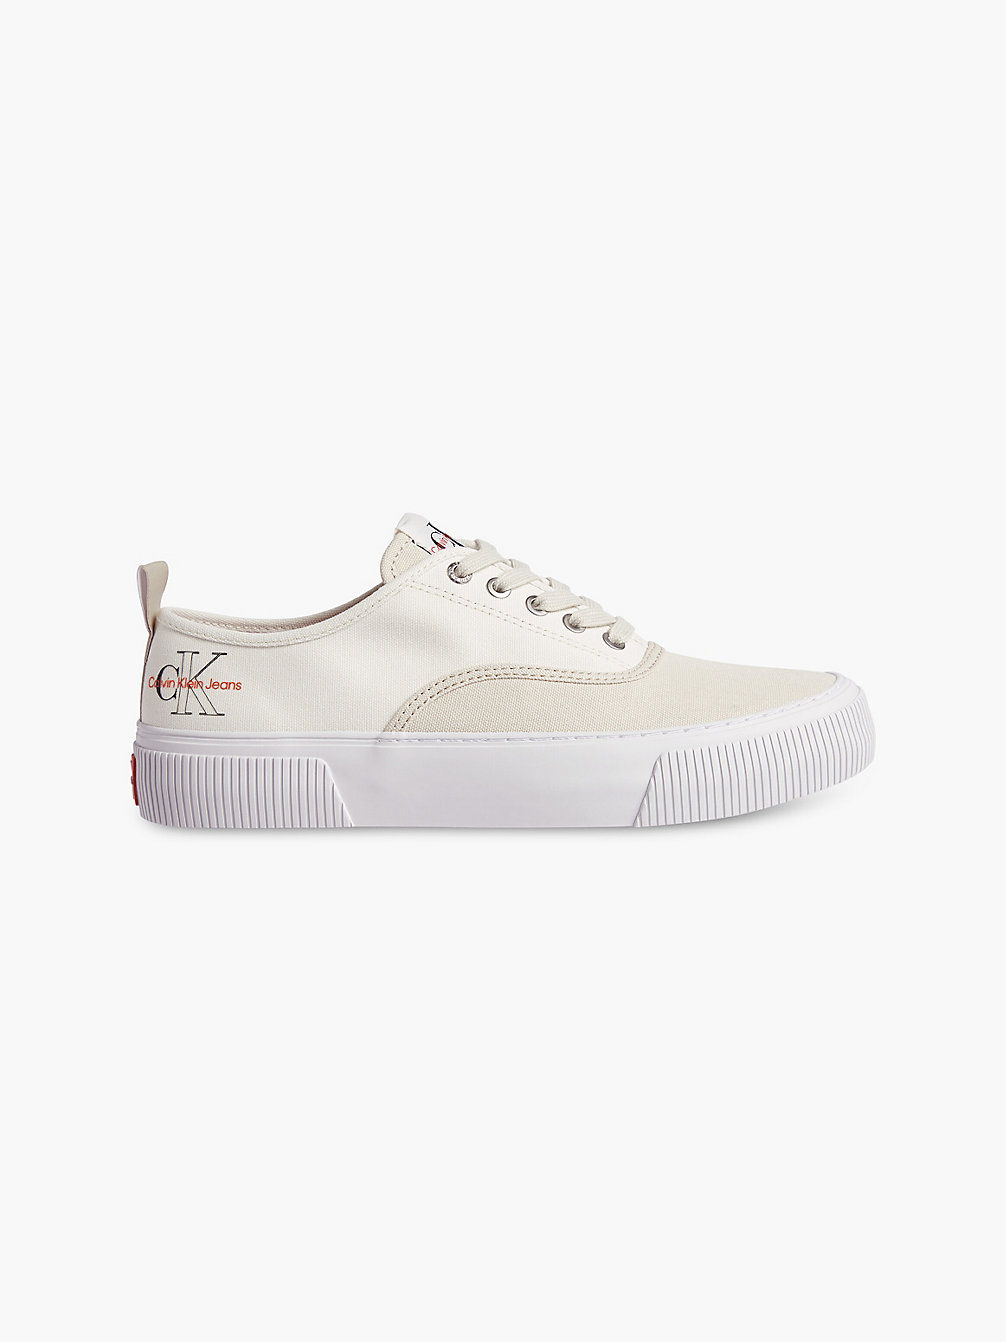 WHITE/EGGSHELL Recycled Canvas Trainers undefined men Calvin Klein